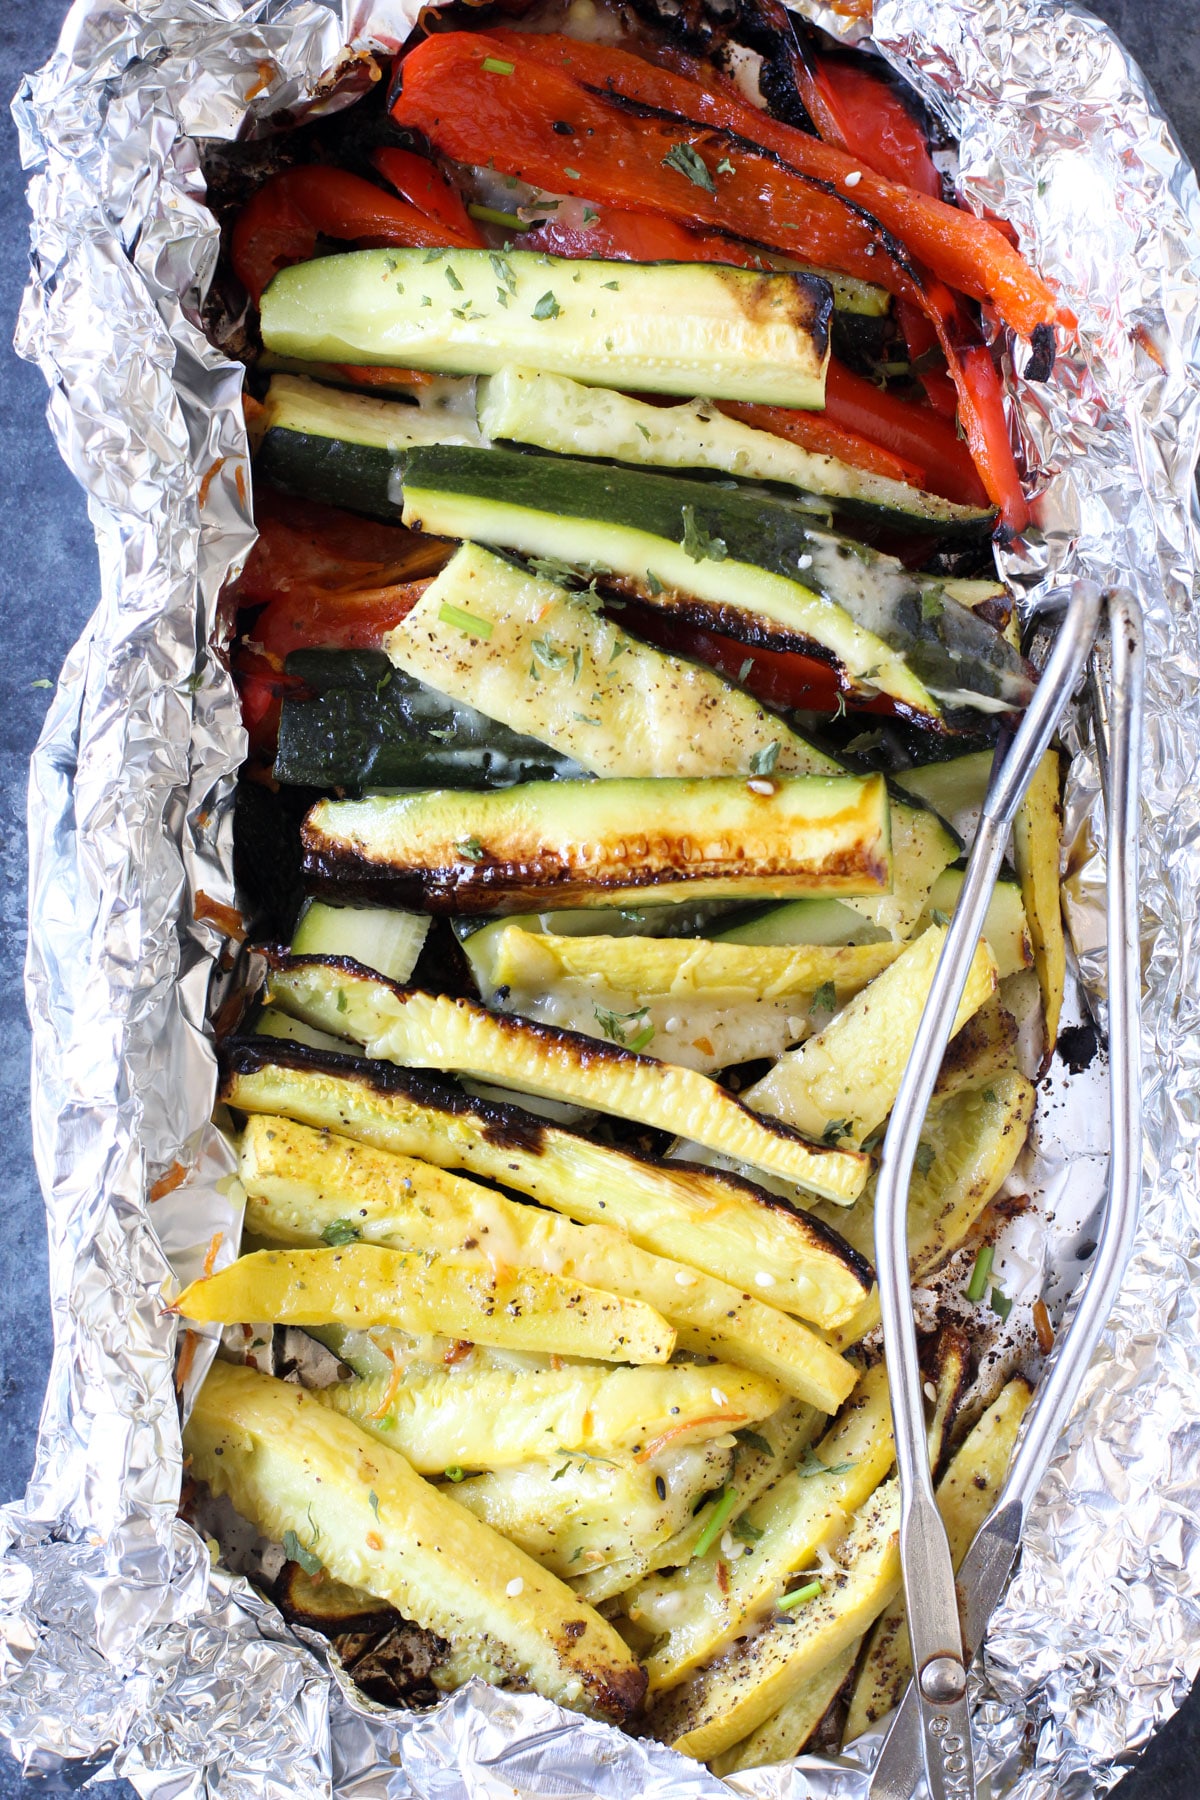 Grilled Veggies in Foil Packets